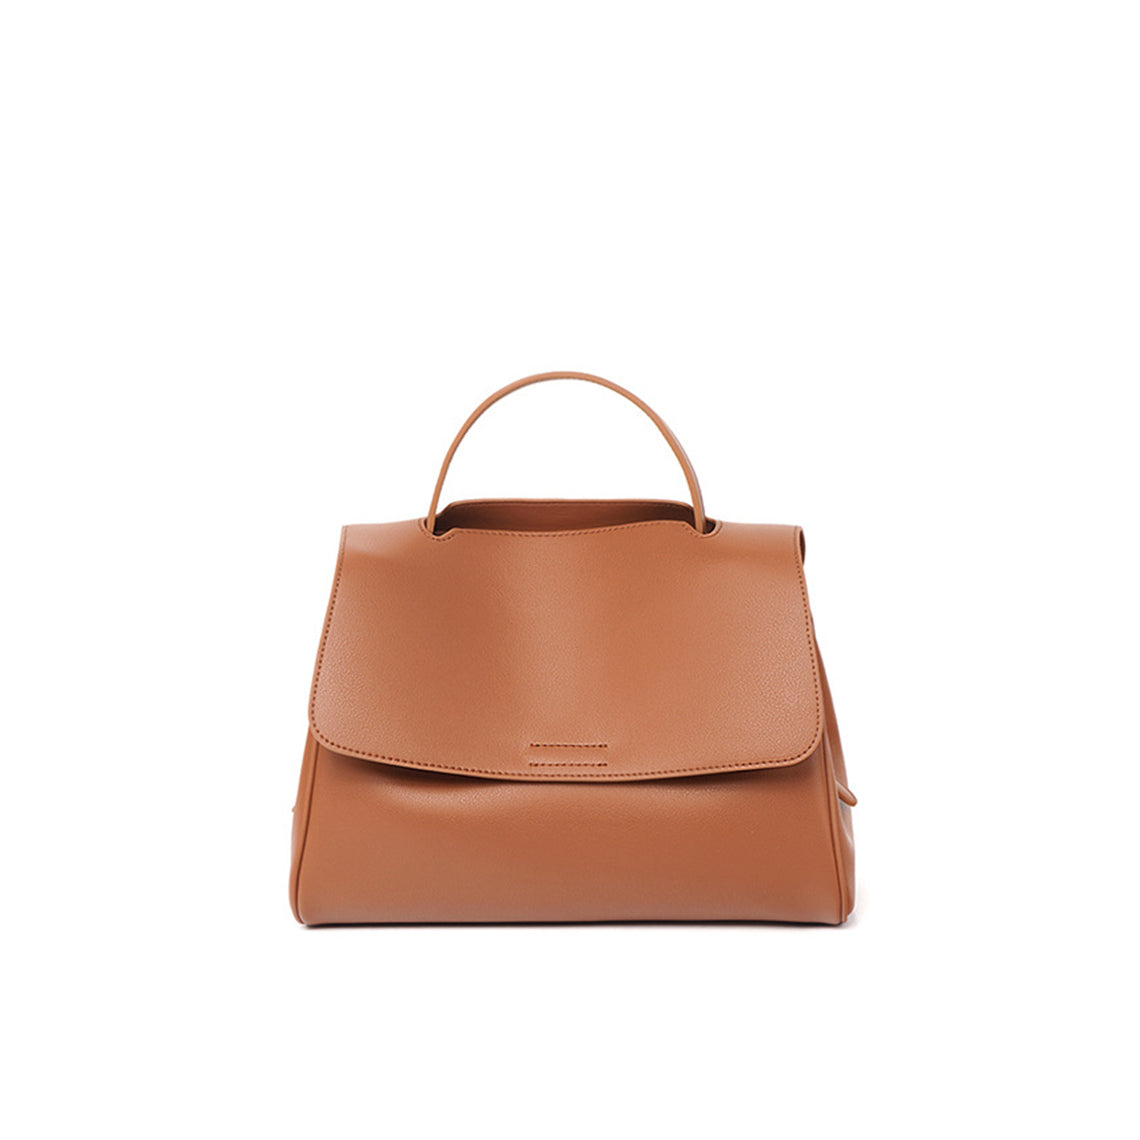 Brown Leather Bags for Women | Smooth Leather Handbags - POPSEWING™